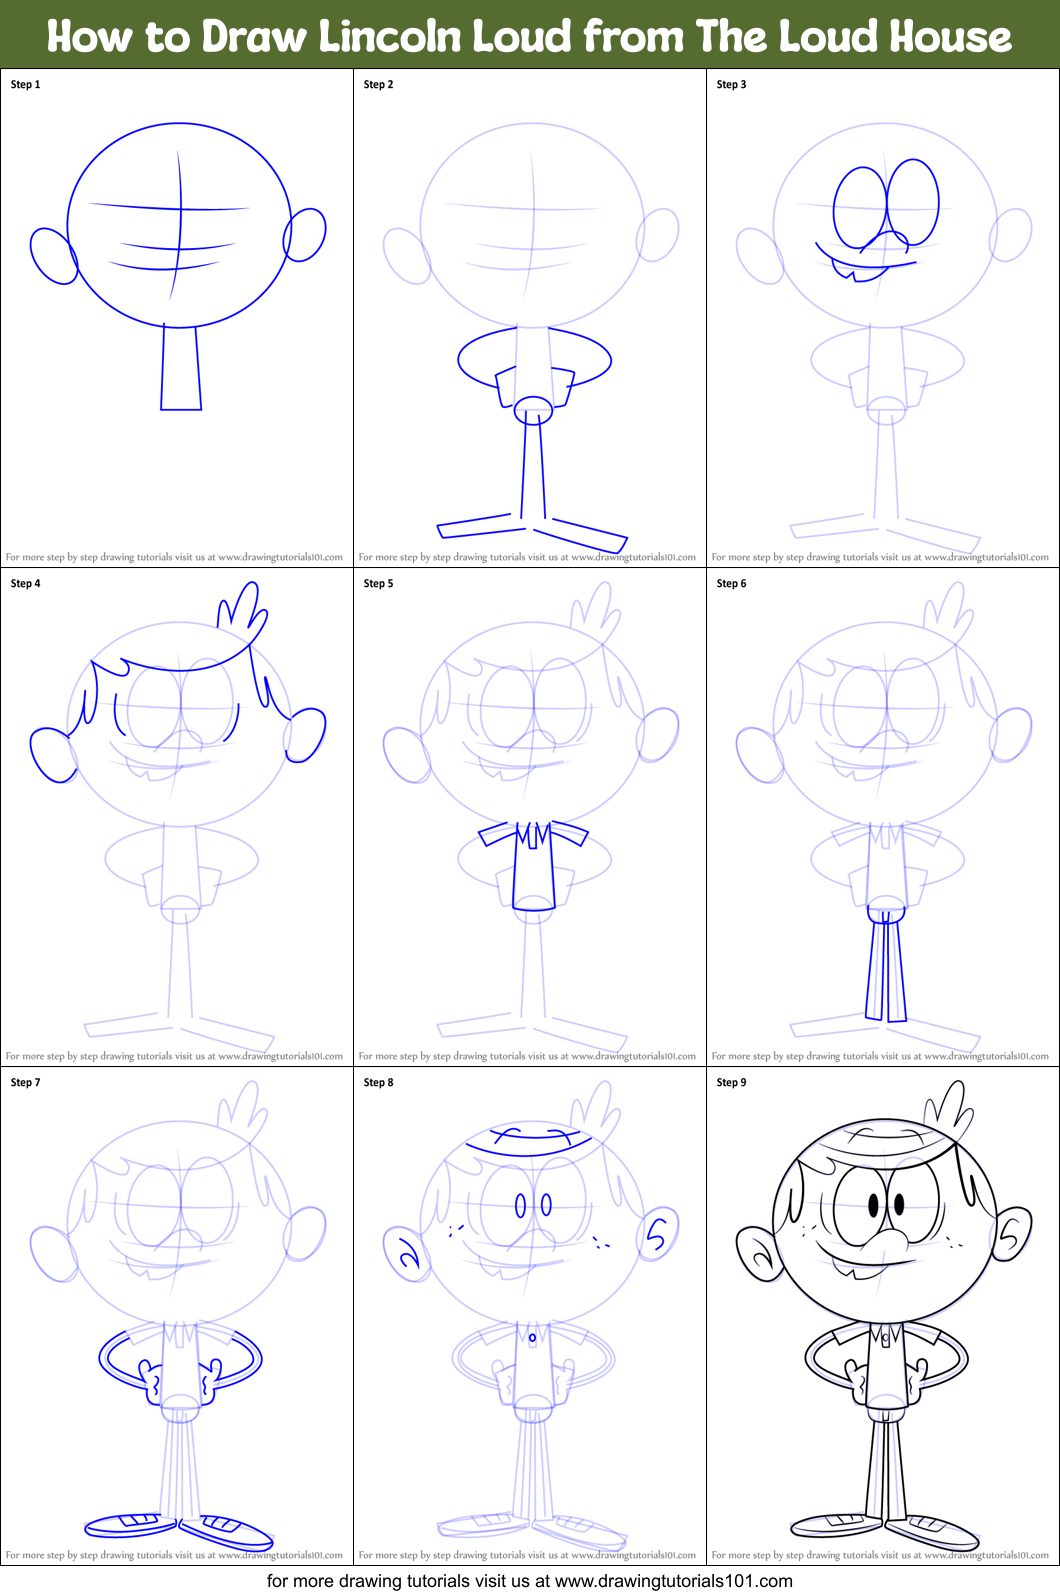 How to Draw Lincoln Loud from The Loud House printable step by step